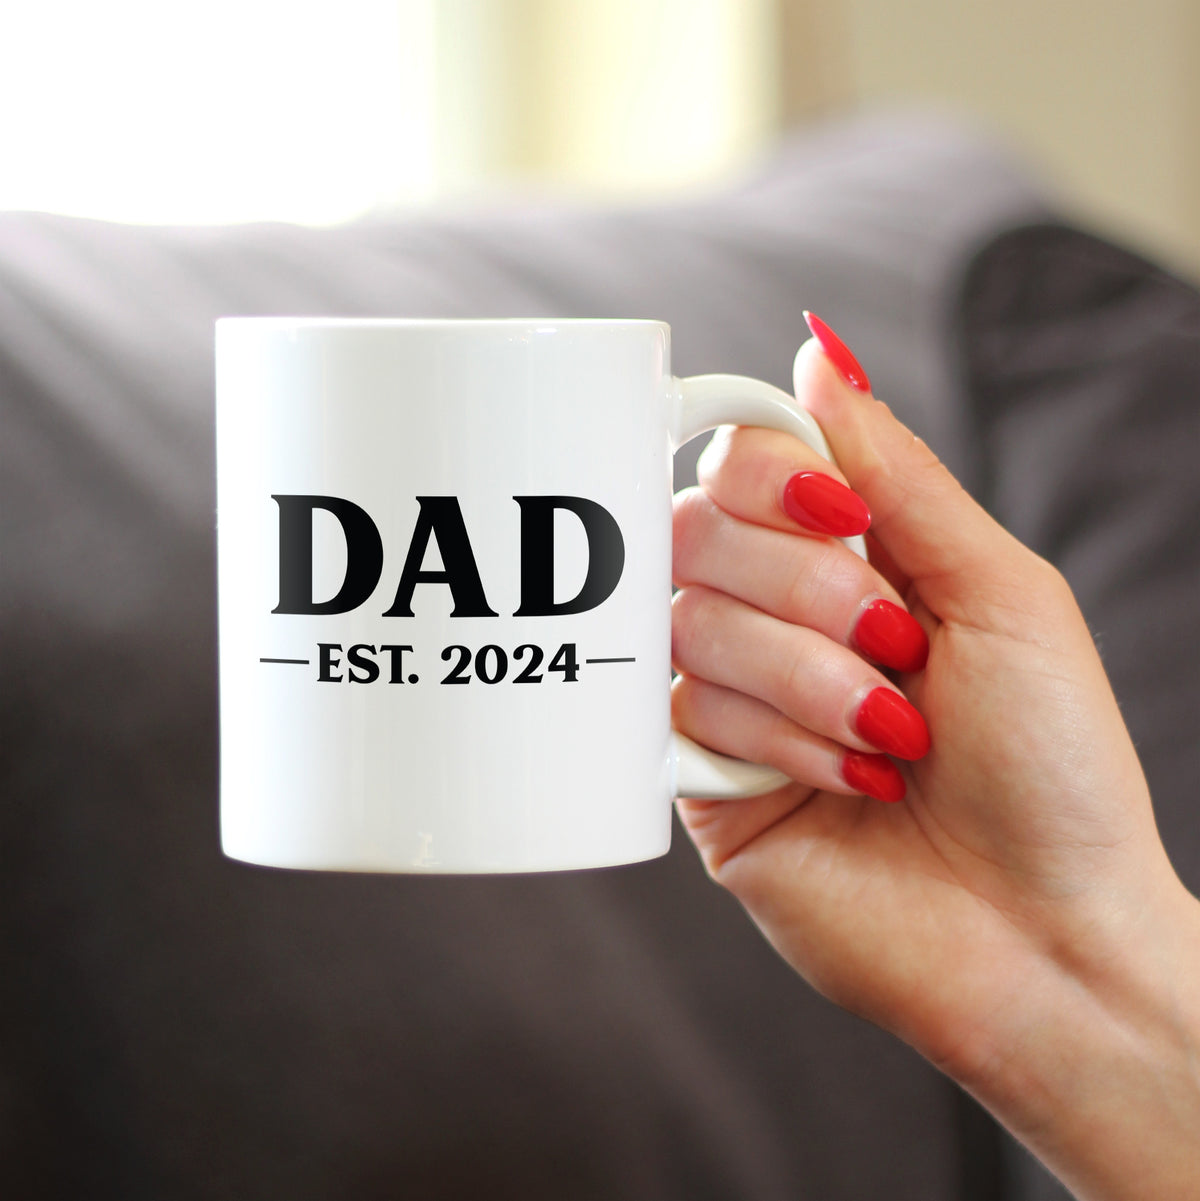 Dad Est 2024 - New Father Coffee Mug Gift for First Time Parents - Bold